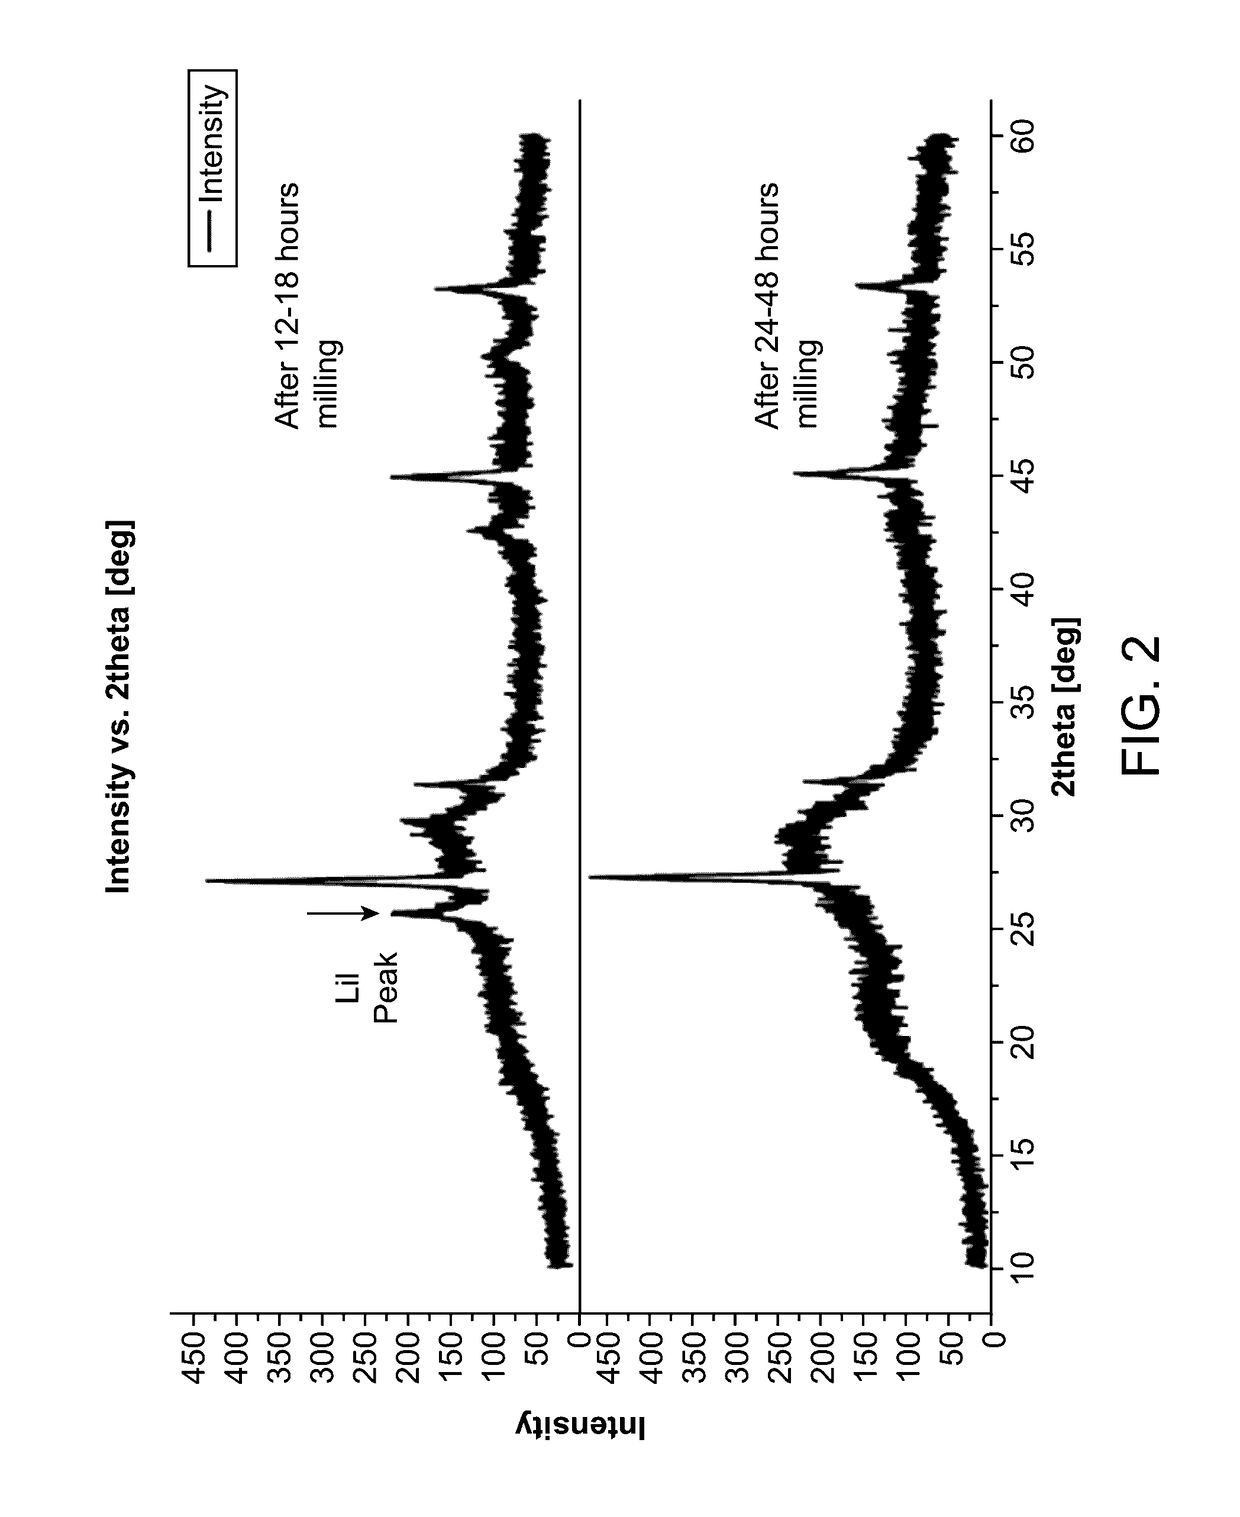 Lithium, phosphorus, sulfur, and iodine including electrolyte and catholyte compositions, electrolyte membranes for electrochemical devices, and annealing methods of making these electrolytes and catholytes